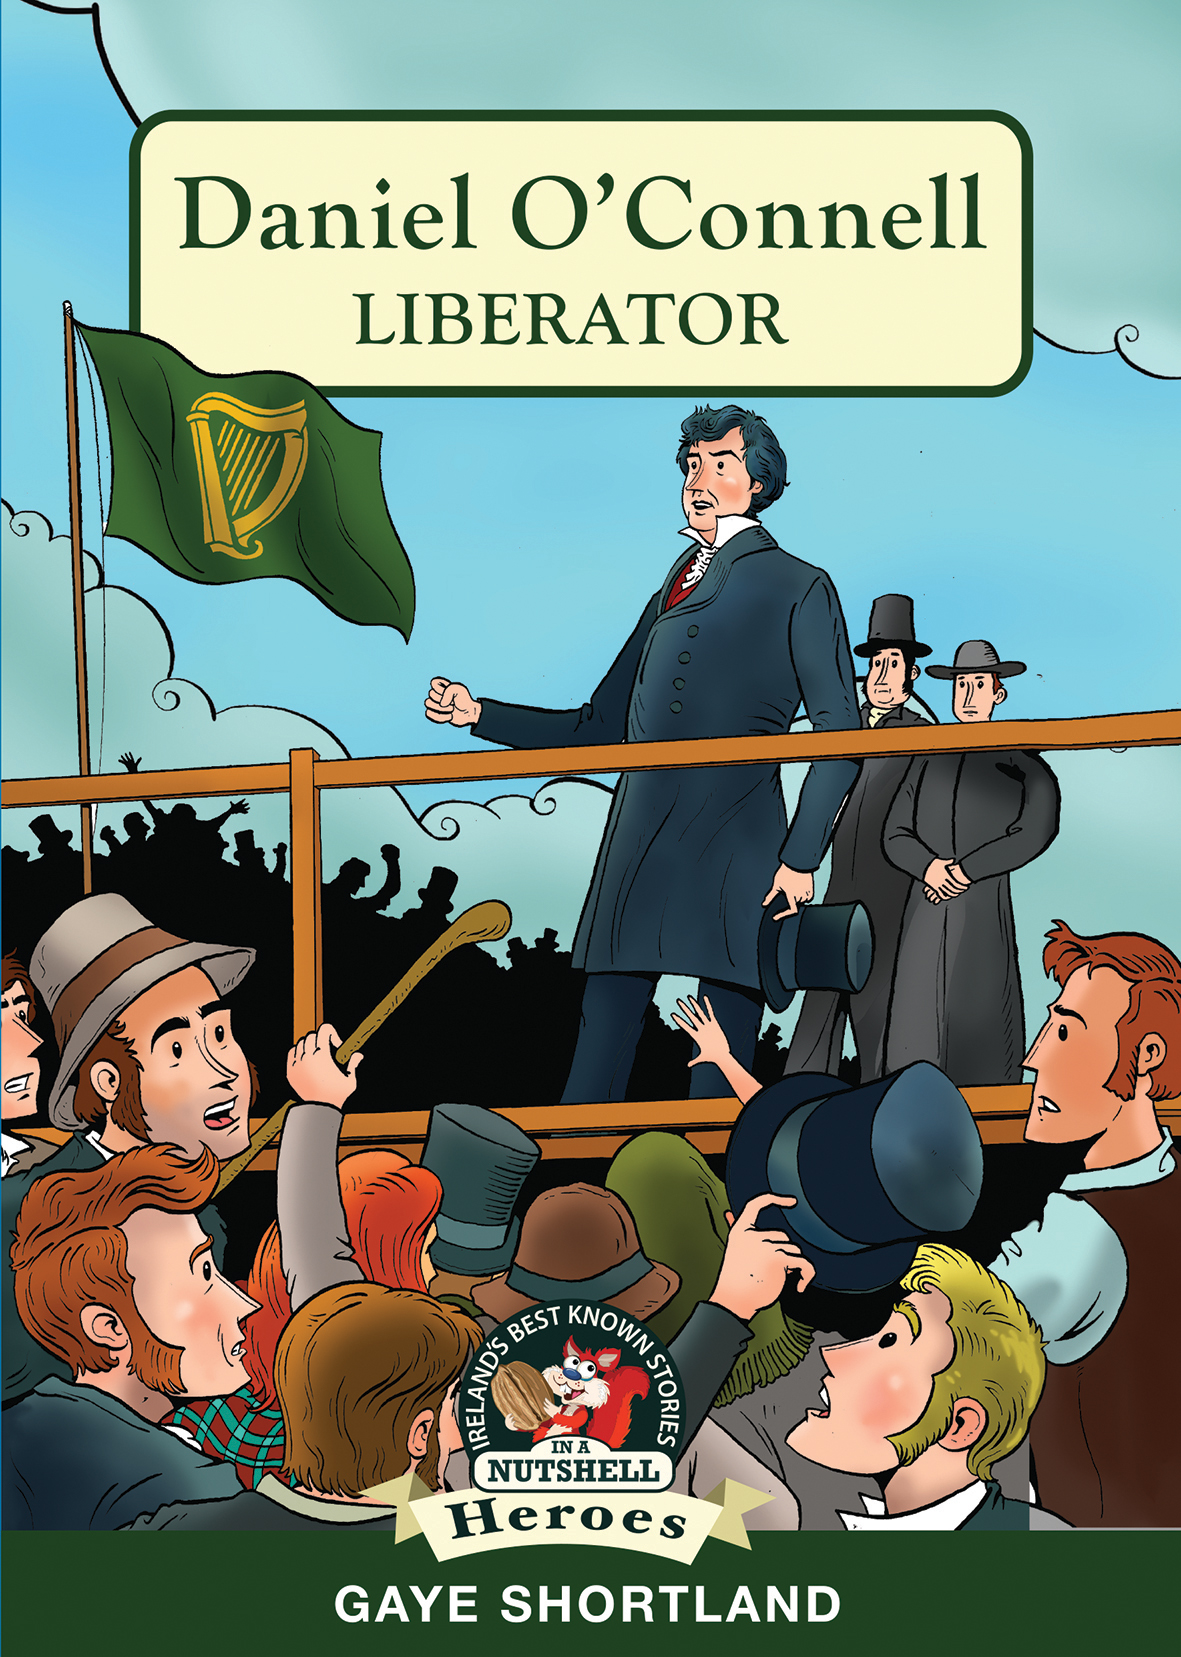 Daniel O'Connell: Liberator (In a Nutshell Series)